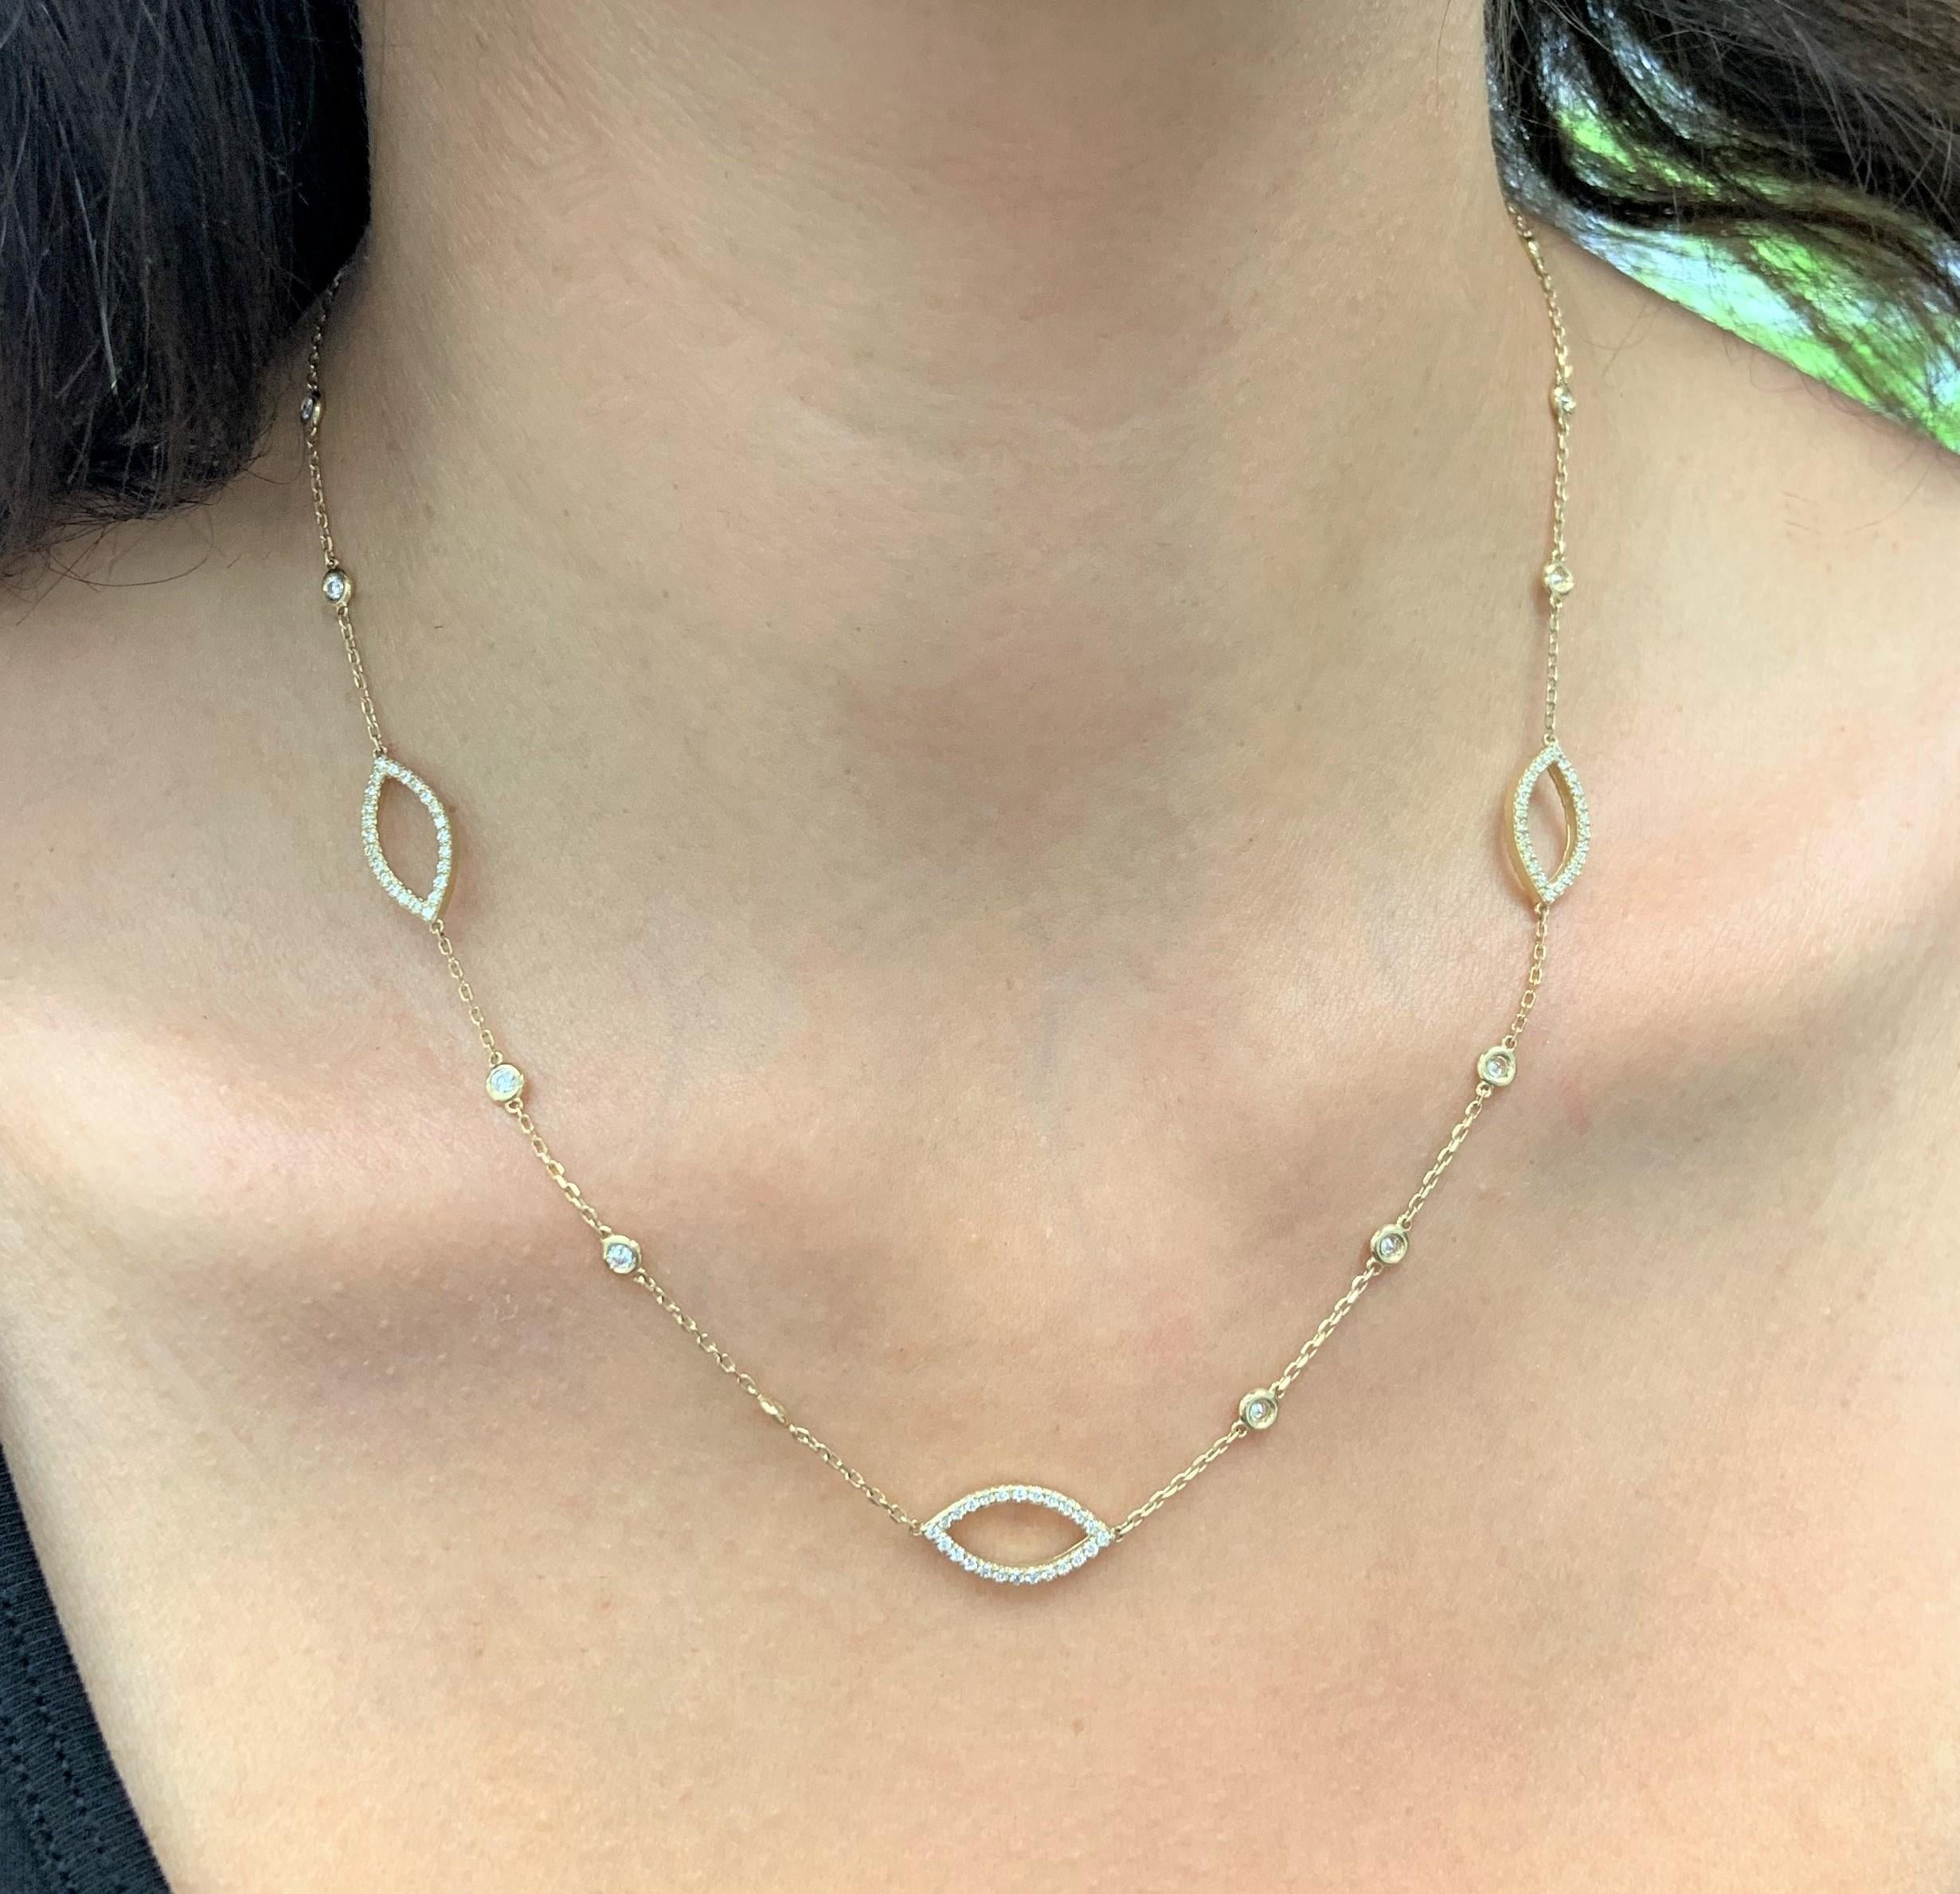 Add this Beautiful and Detailed Layering Necklace to your look! Crafted of 14K Yellow Gold this Necklace features approximately 1.48 cts of round Natural White Diamonds. Wear alone or with other necklaces.
-14K Gold
-1.48cts Natural Round White